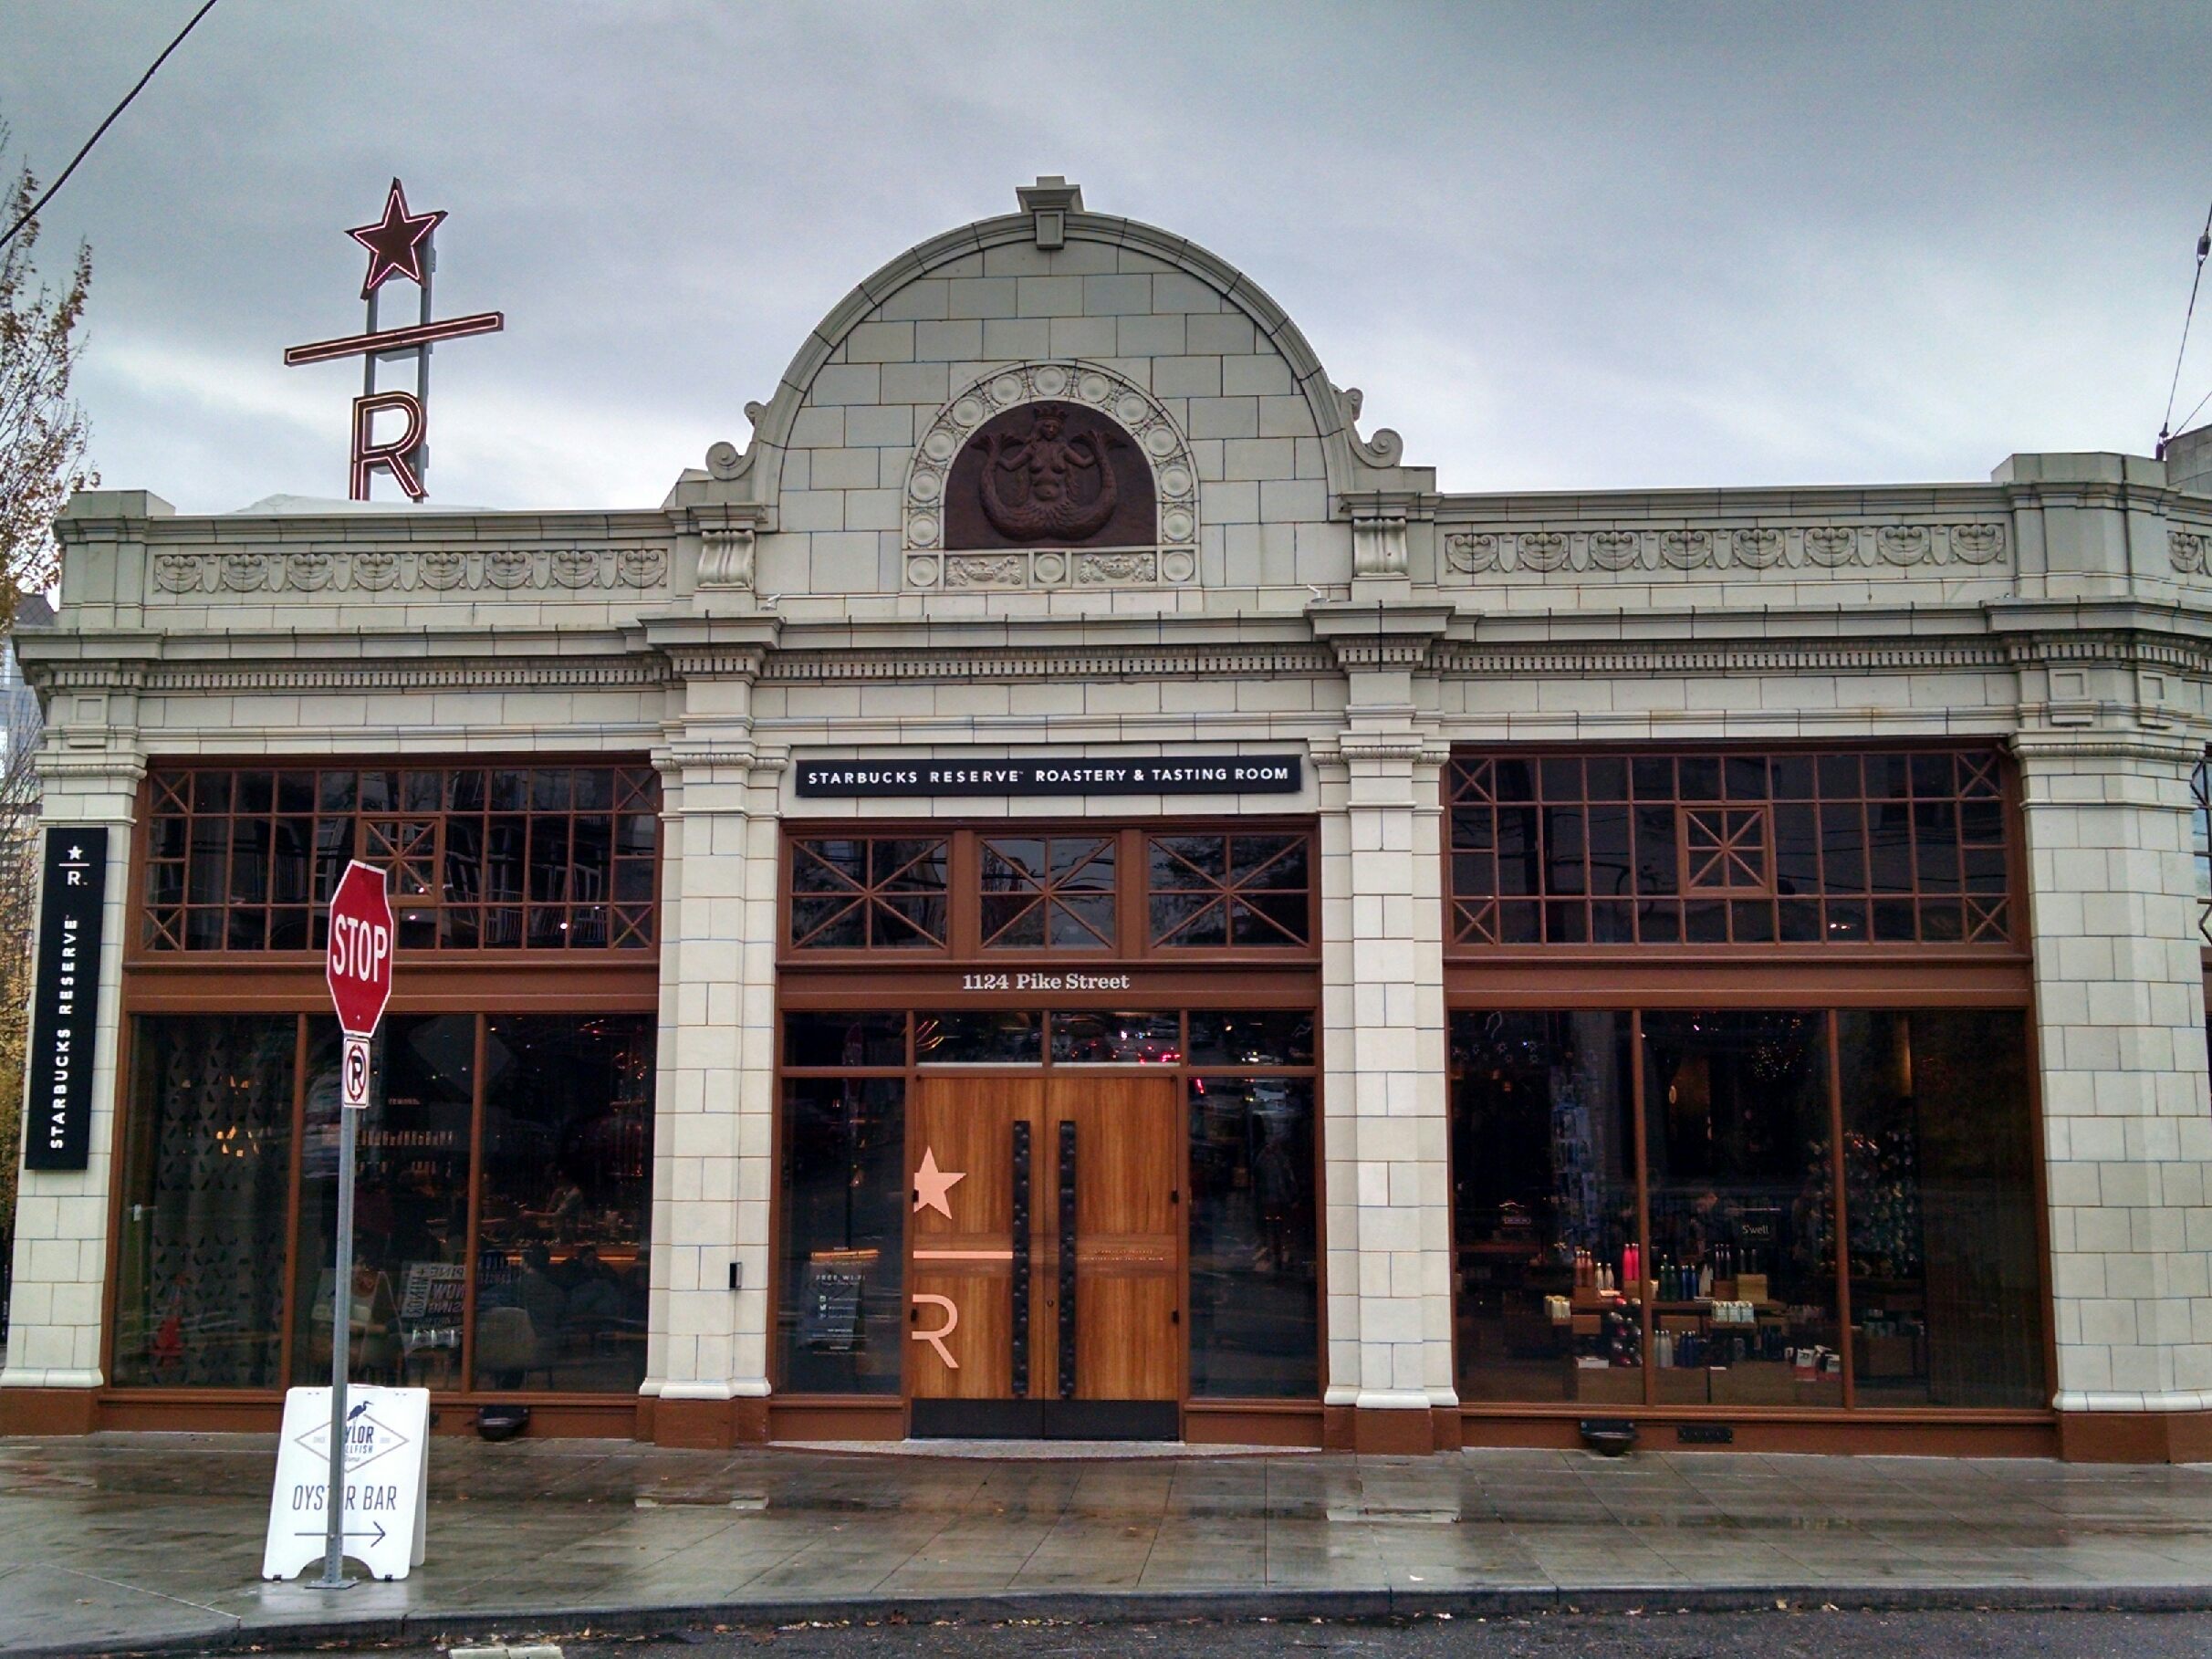 Starbucks Reserve Roastery & Tasting Room at1124 Pike St, Seattle, WA 9 blocks up the hill from their original location 